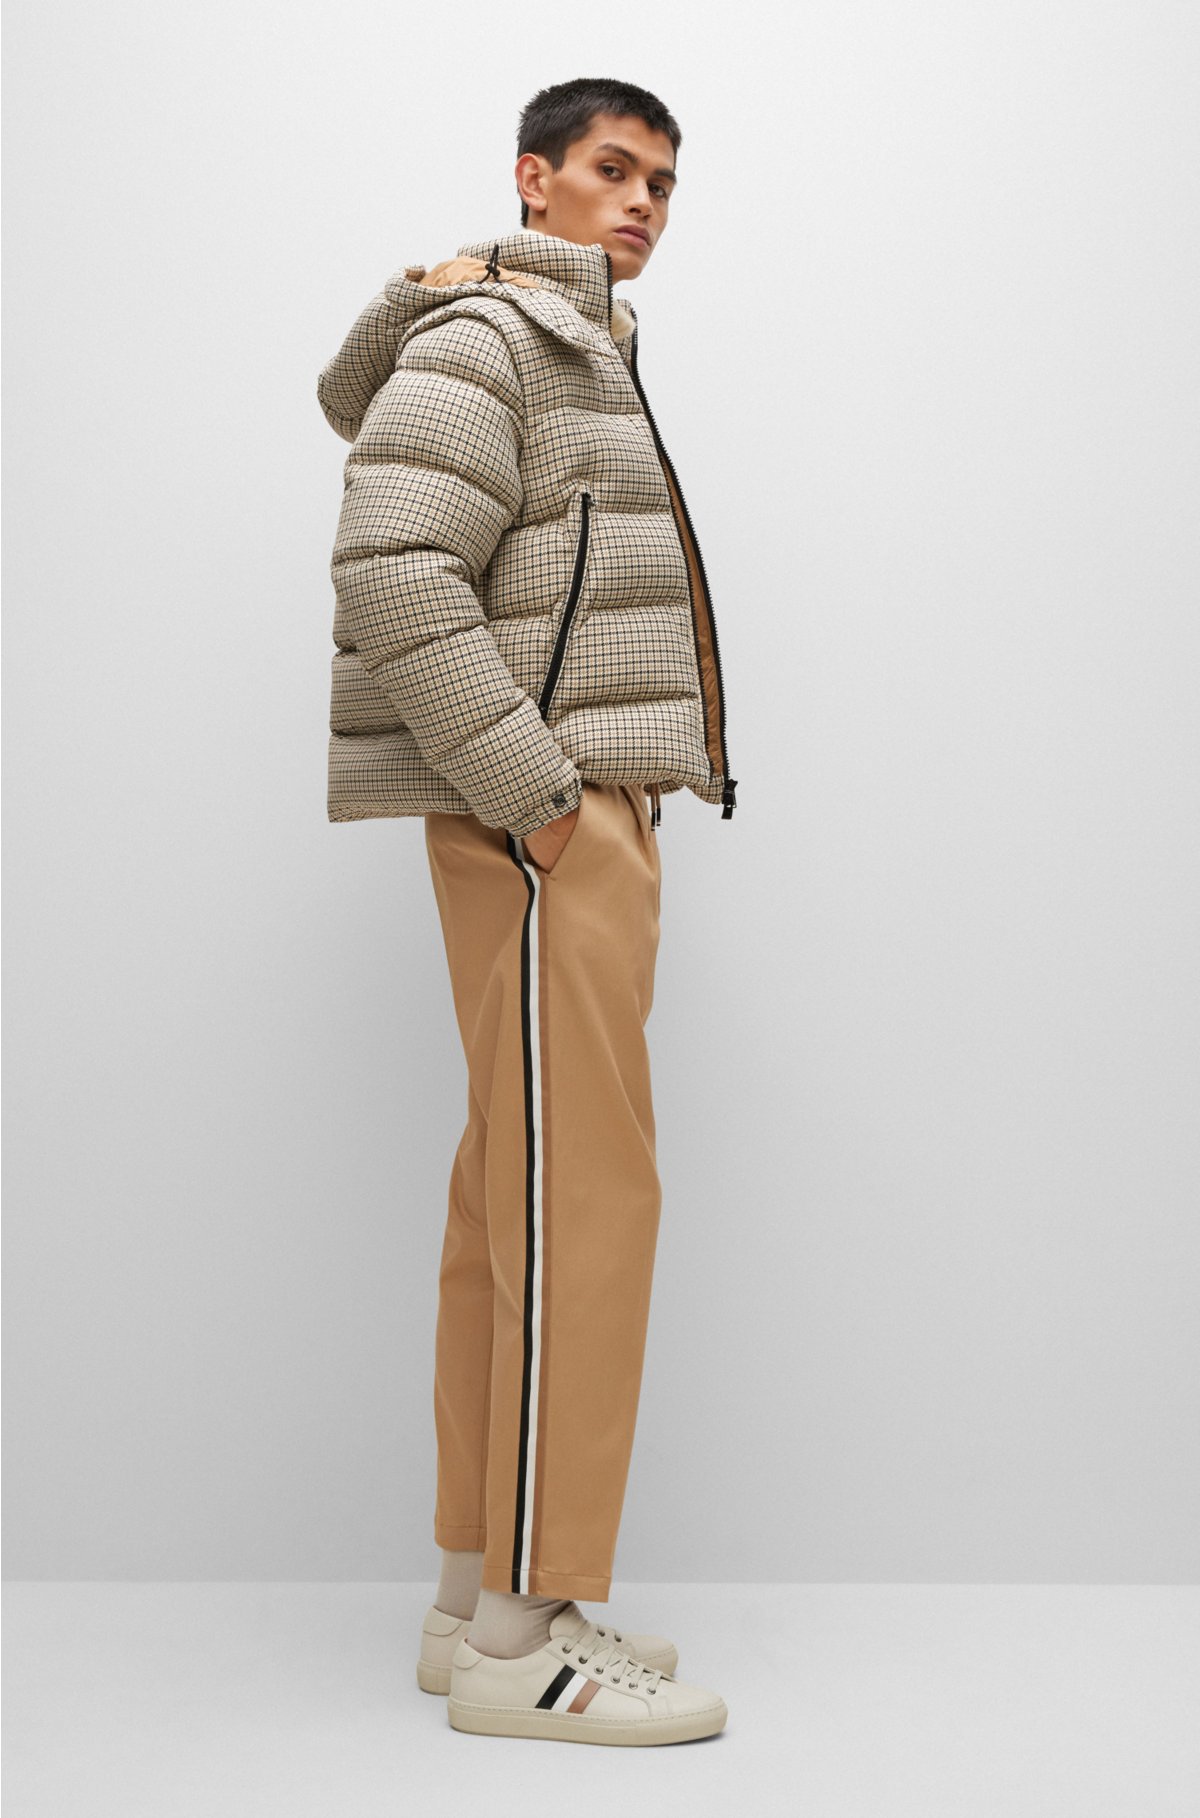 Cropped Monogram Puffer Jacket, Beige, Contact Seller for Other Sizes